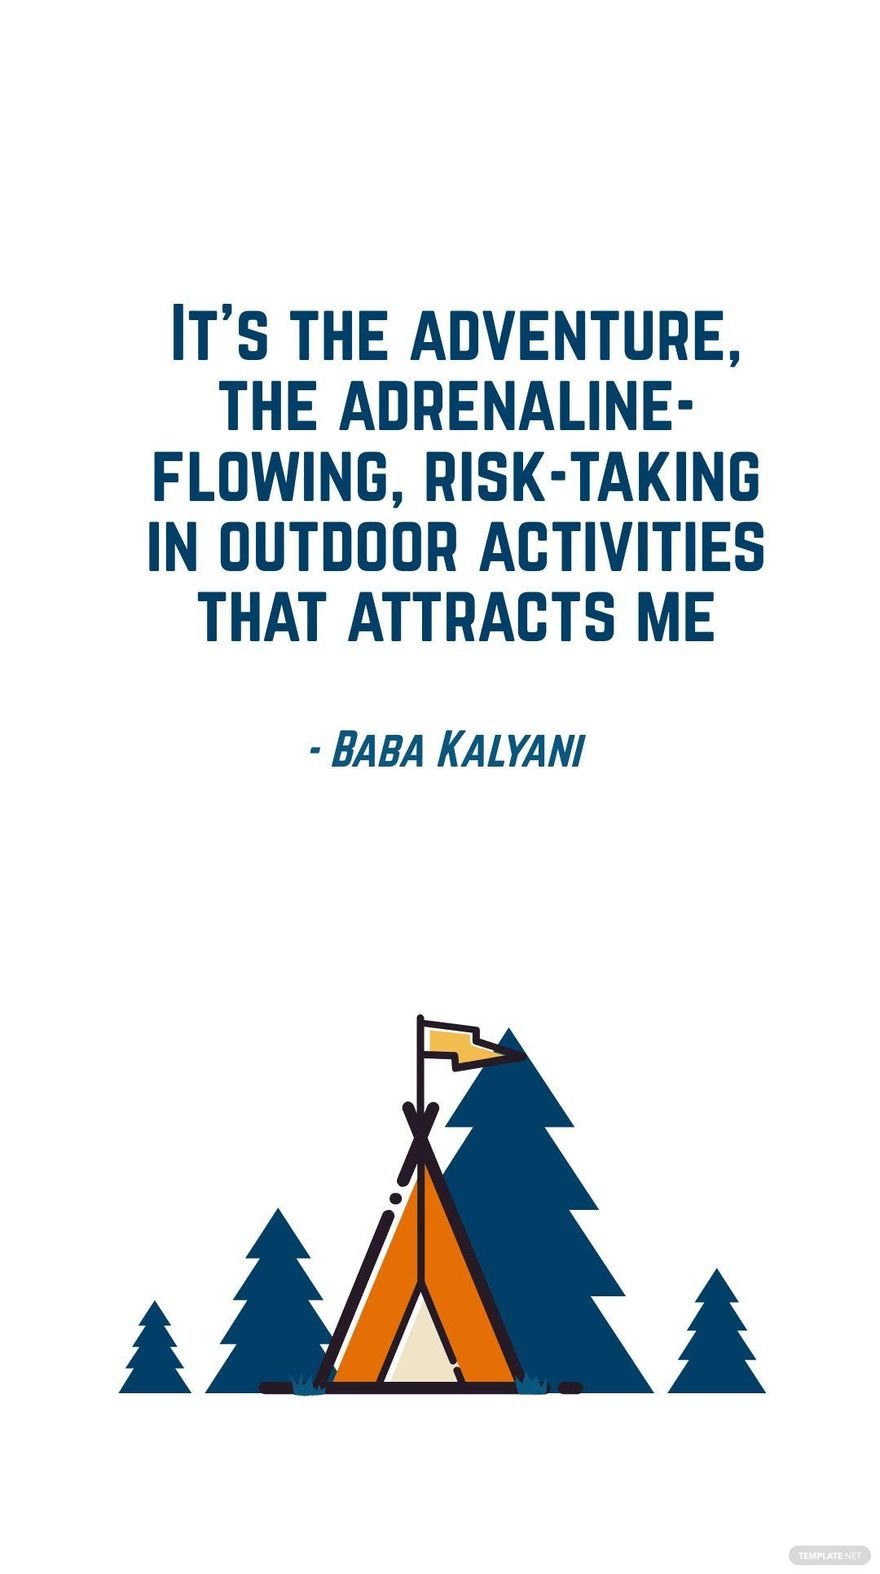 Free Baba Kalyani - It's the adventure, the adrenaline-flowing, risk-taking in outdoor activities that attracts me in JPG